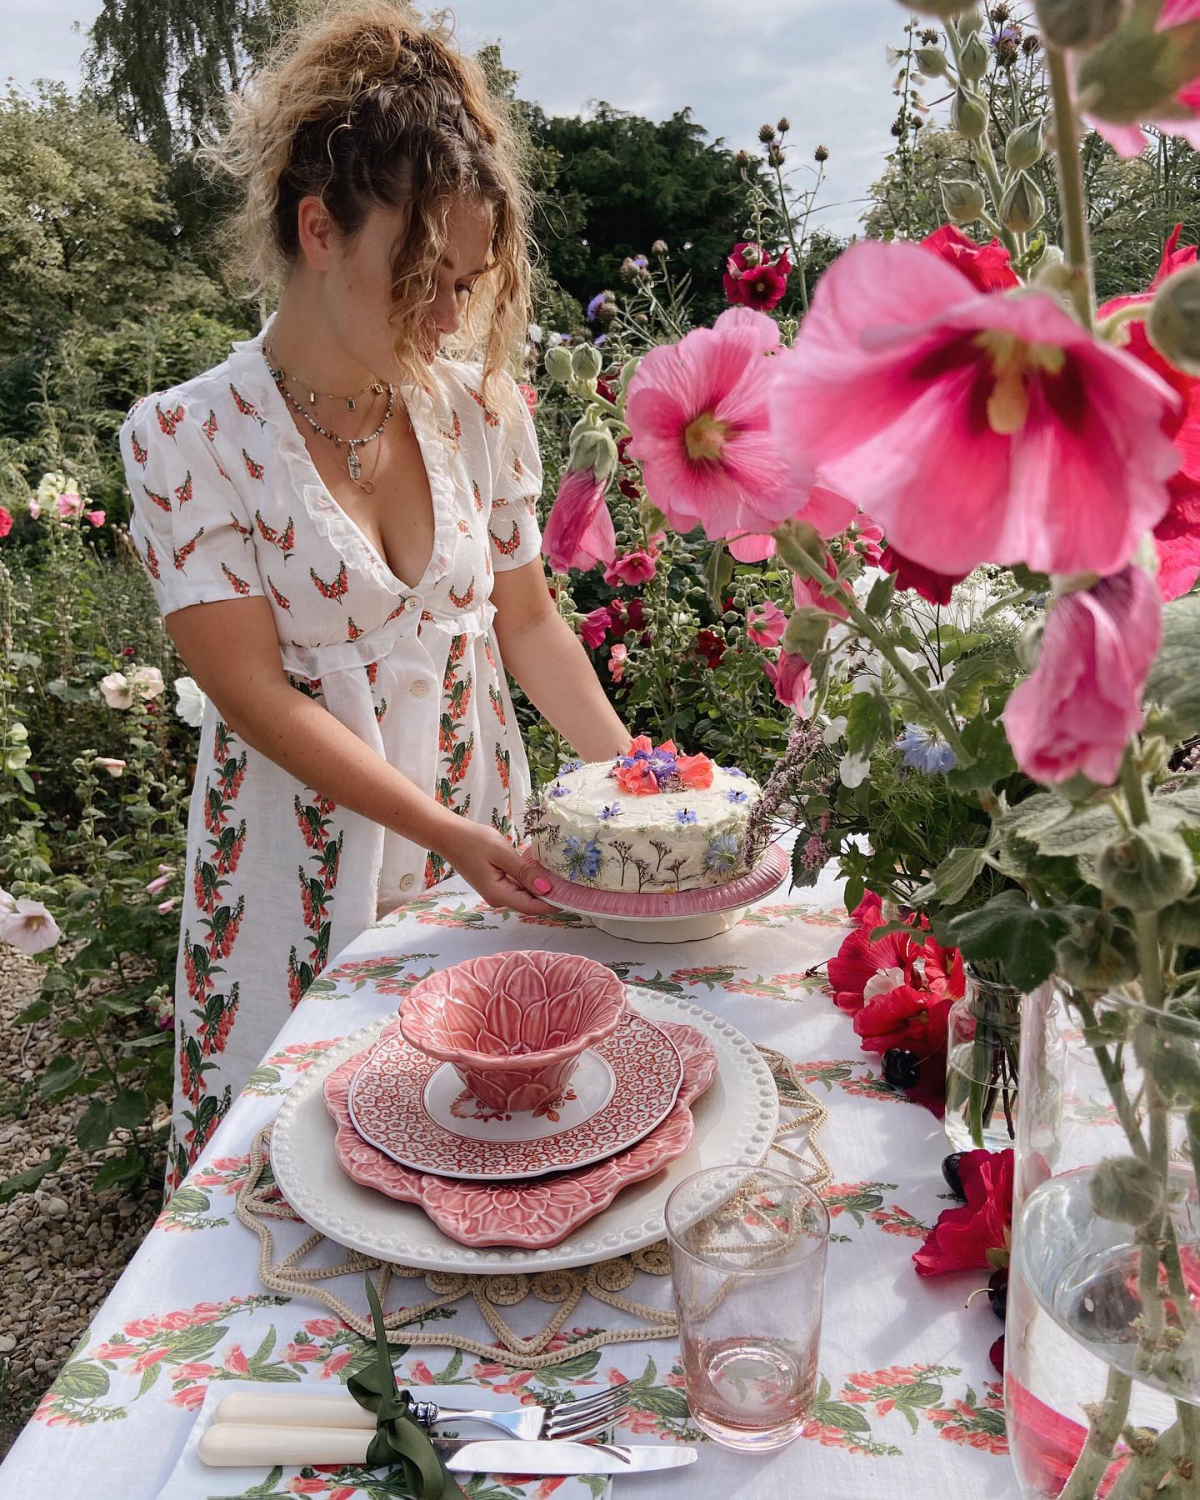 woman setting table for tea party